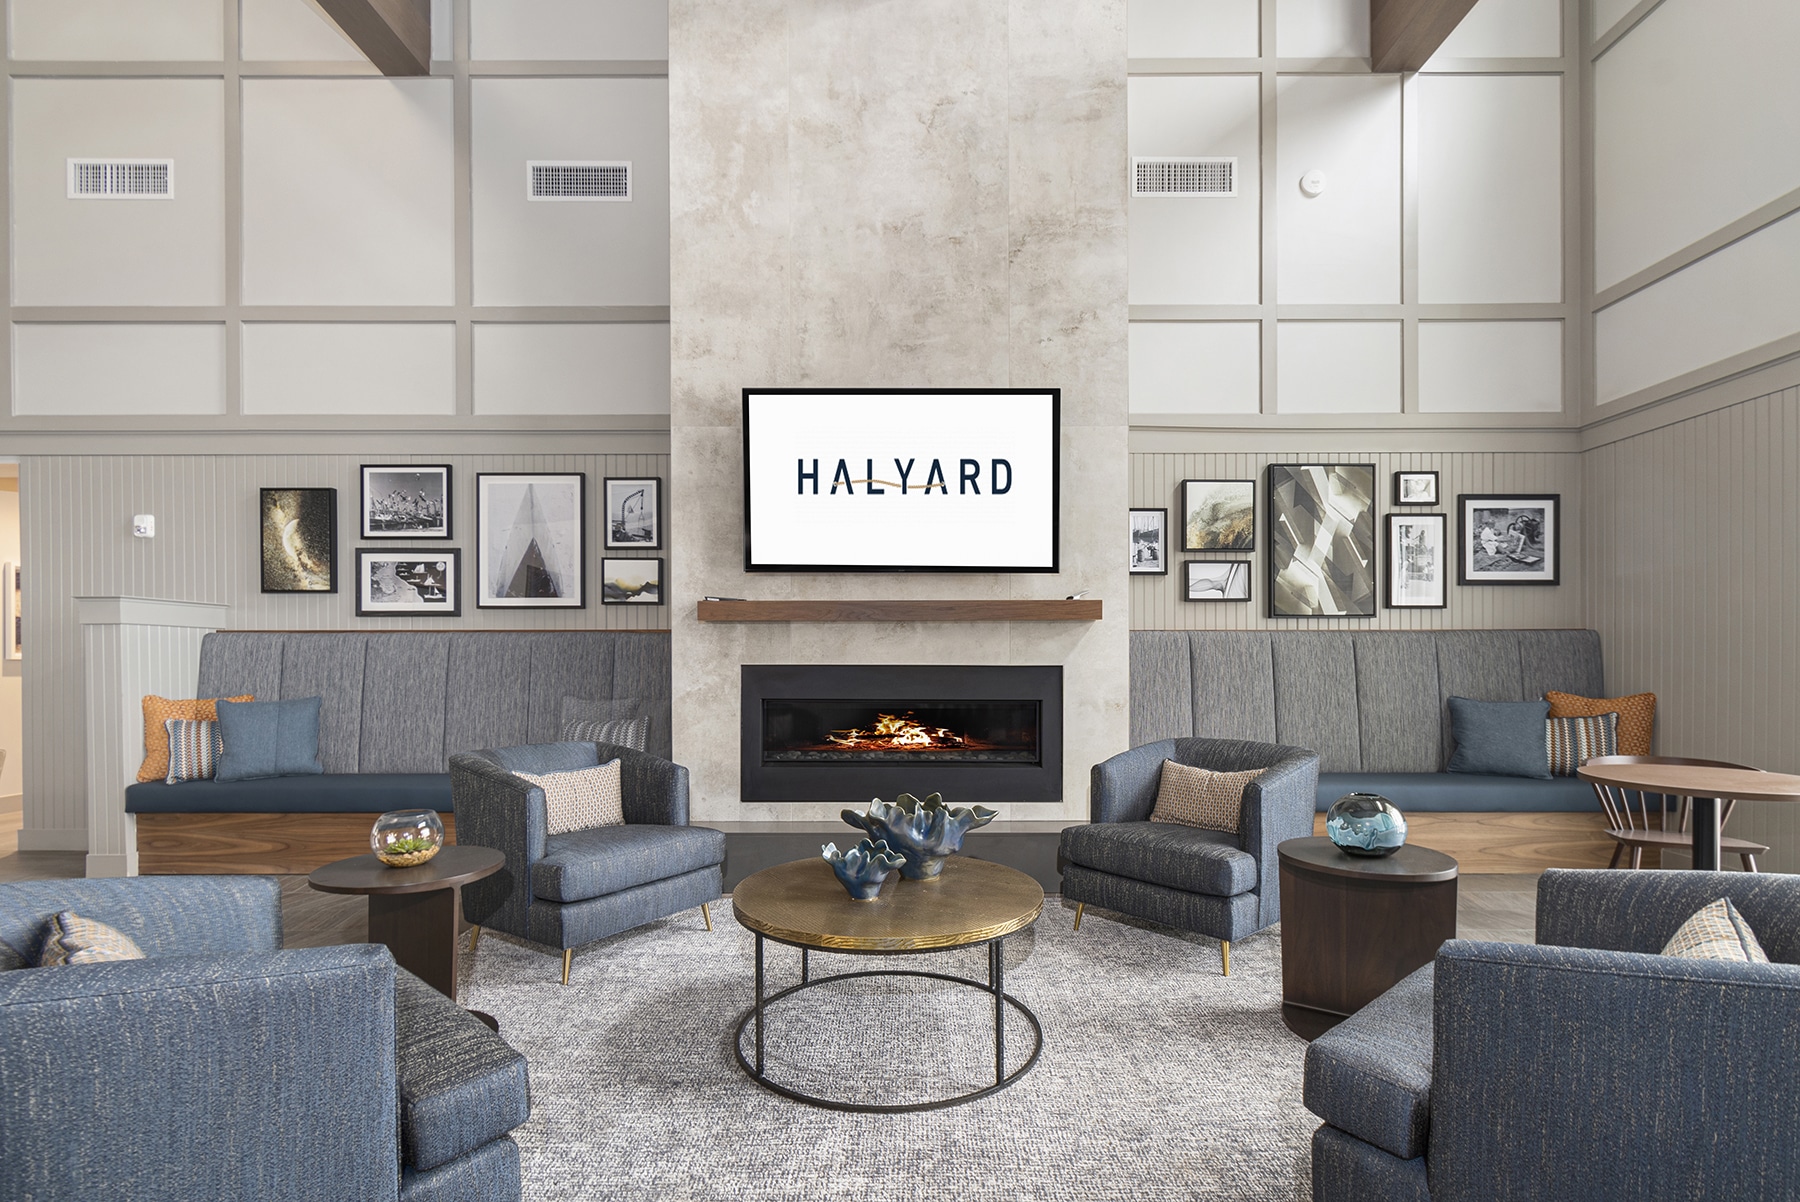 Halyard Apartments, managed by Dolben, in Gloucester, Massachusetts